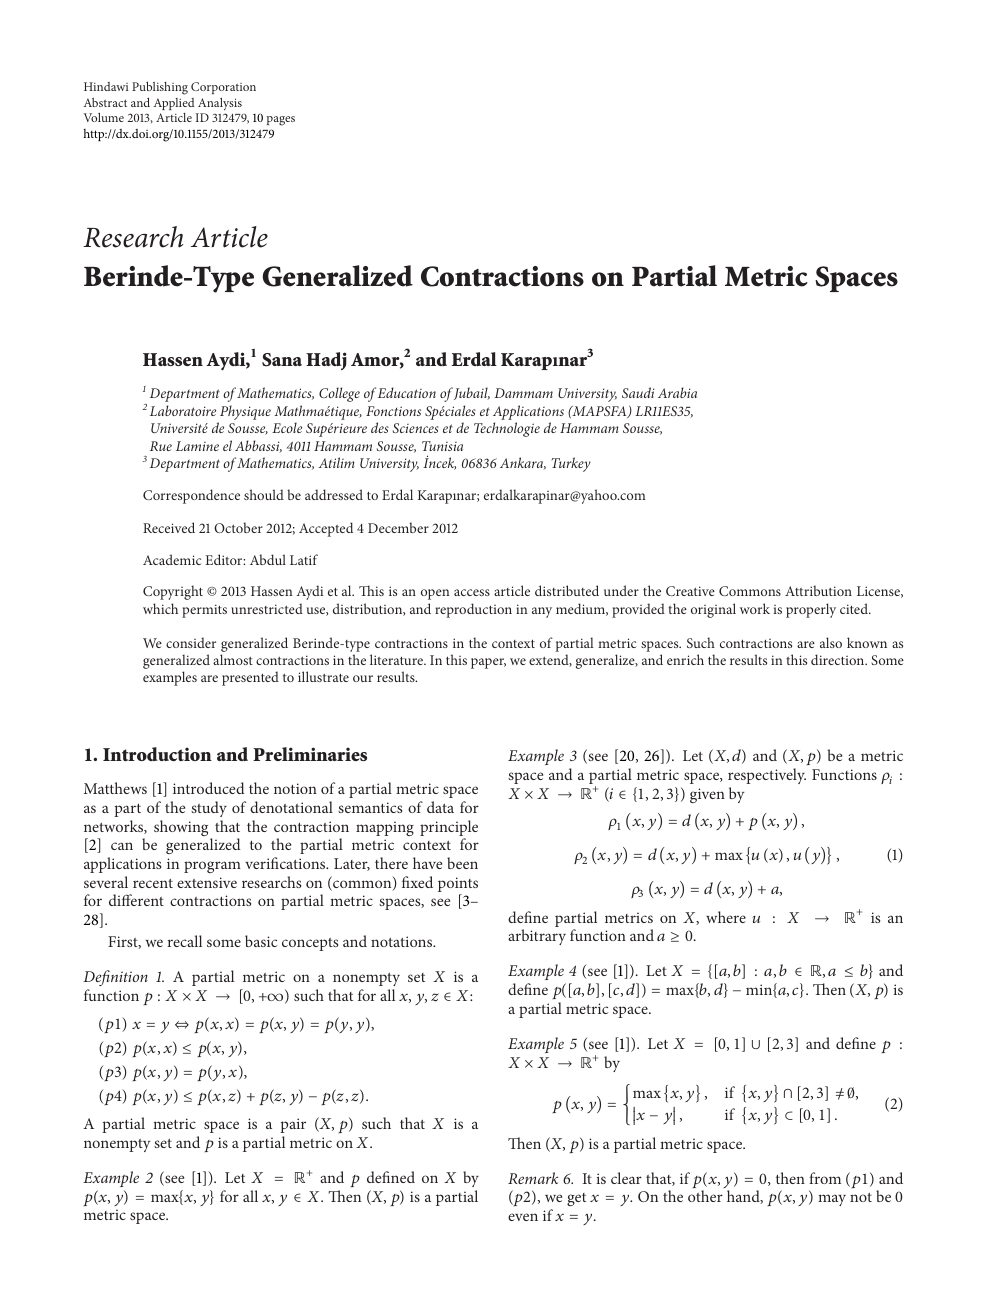 Berinde Type Generalized Contractions On Partial Metric Spaces Topic Of Research Paper In Mathematics Download Scholarly Article Pdf And Read For Free On Cyberleninka Open Science Hub